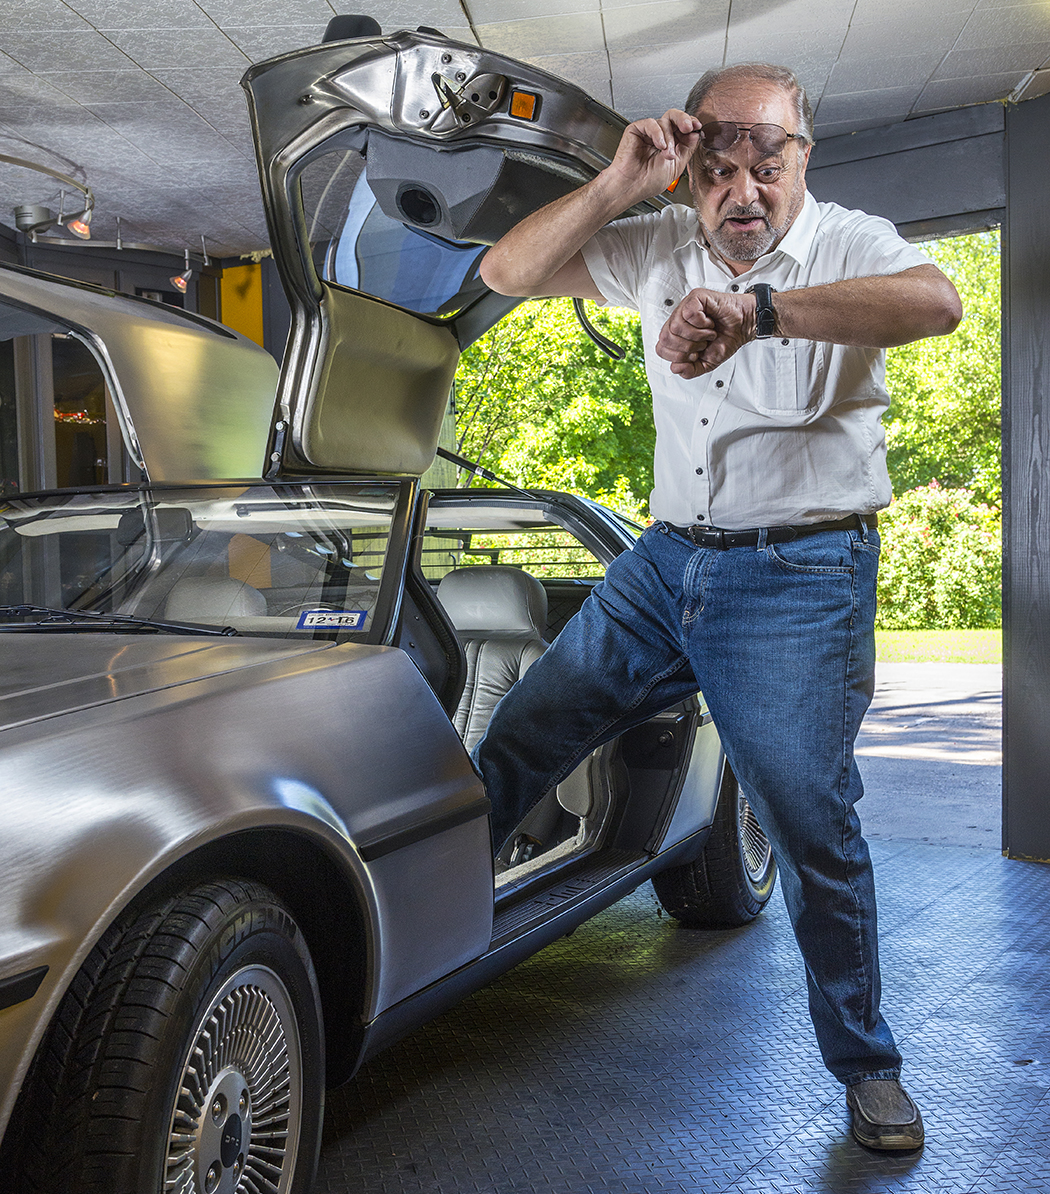 In his best Doc Brown pose, Jaime Sendra steps out of his 1980 DeLorean. (Photo by Danny Fulgencio)